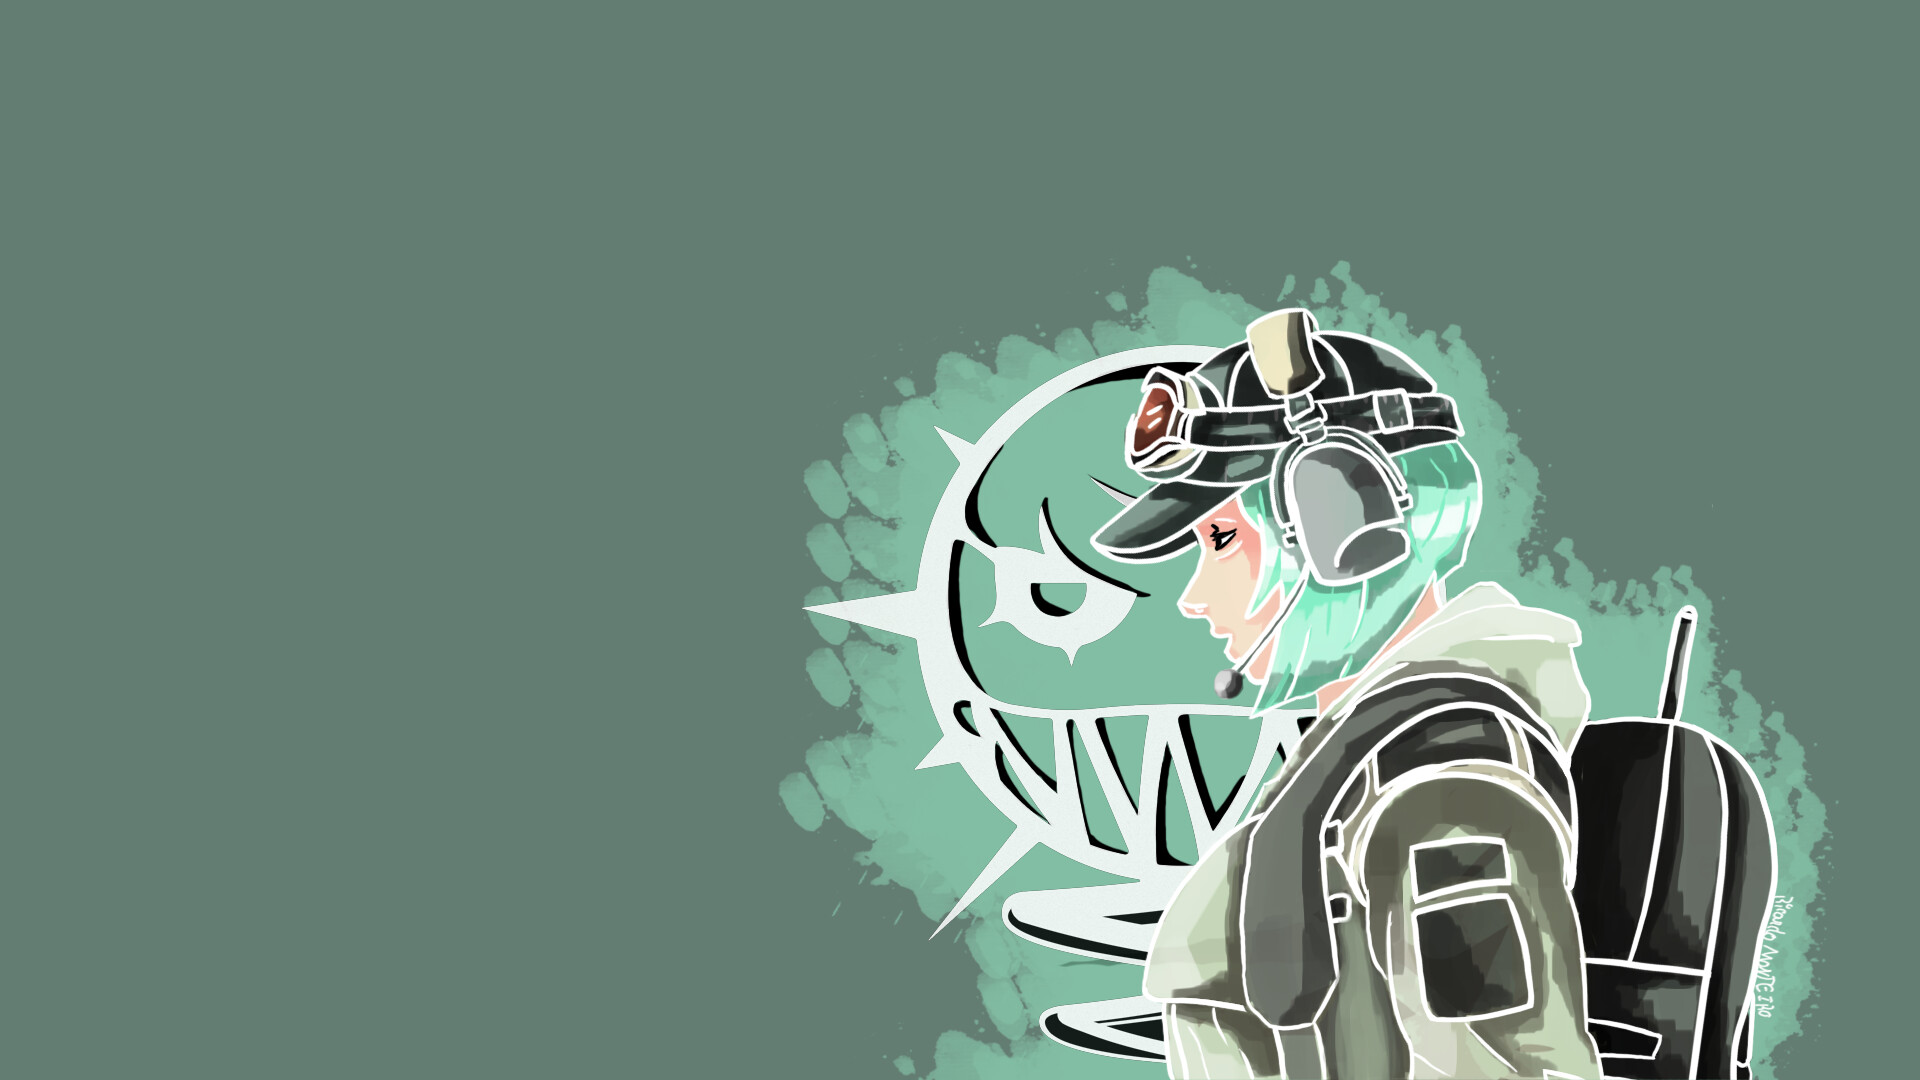 Fan Art of "Ela" from the game Rainbow Six Siege The logo behind ...